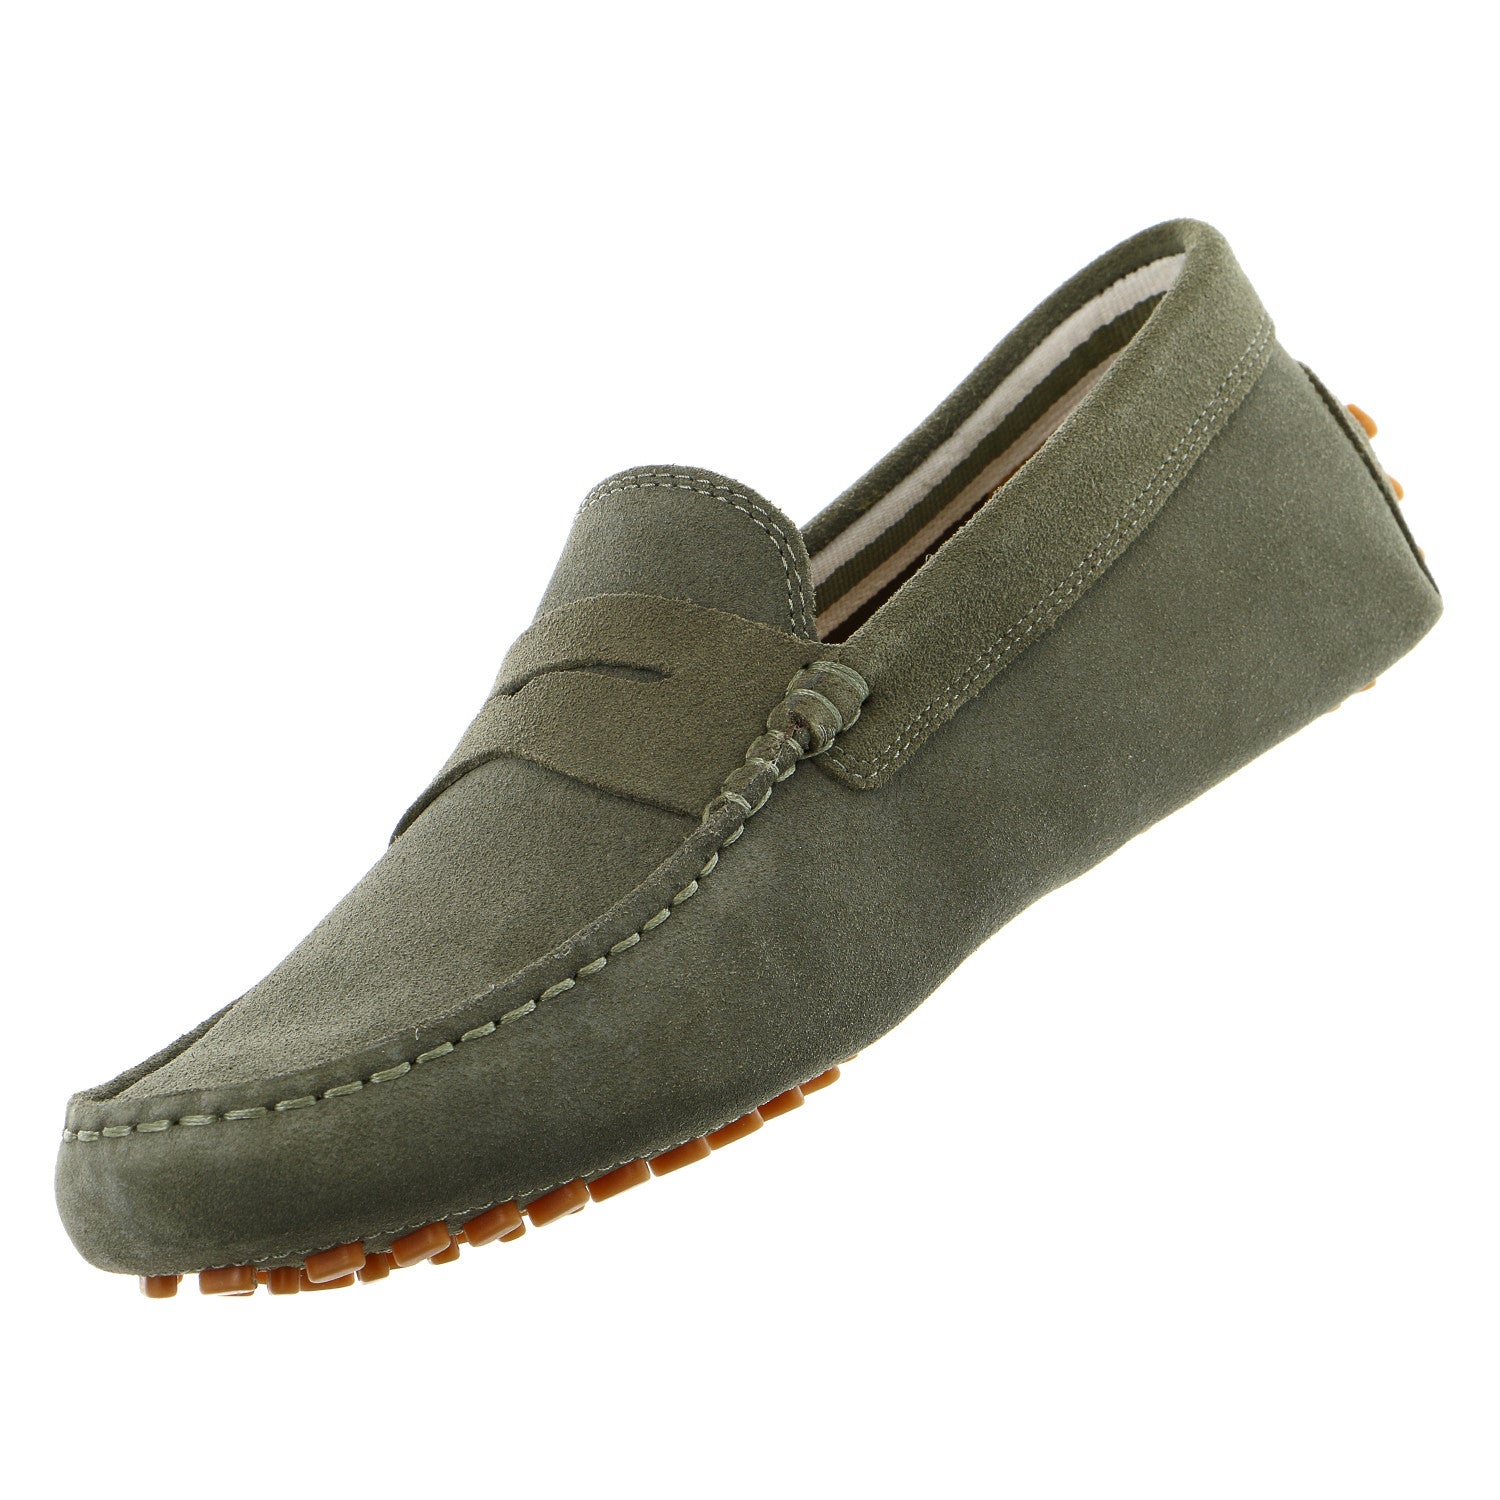 Sightseeing rygrad ydre Lacoste CONCOURS 116 1 Slip-On Loafer - Men's - Shoplifestyle